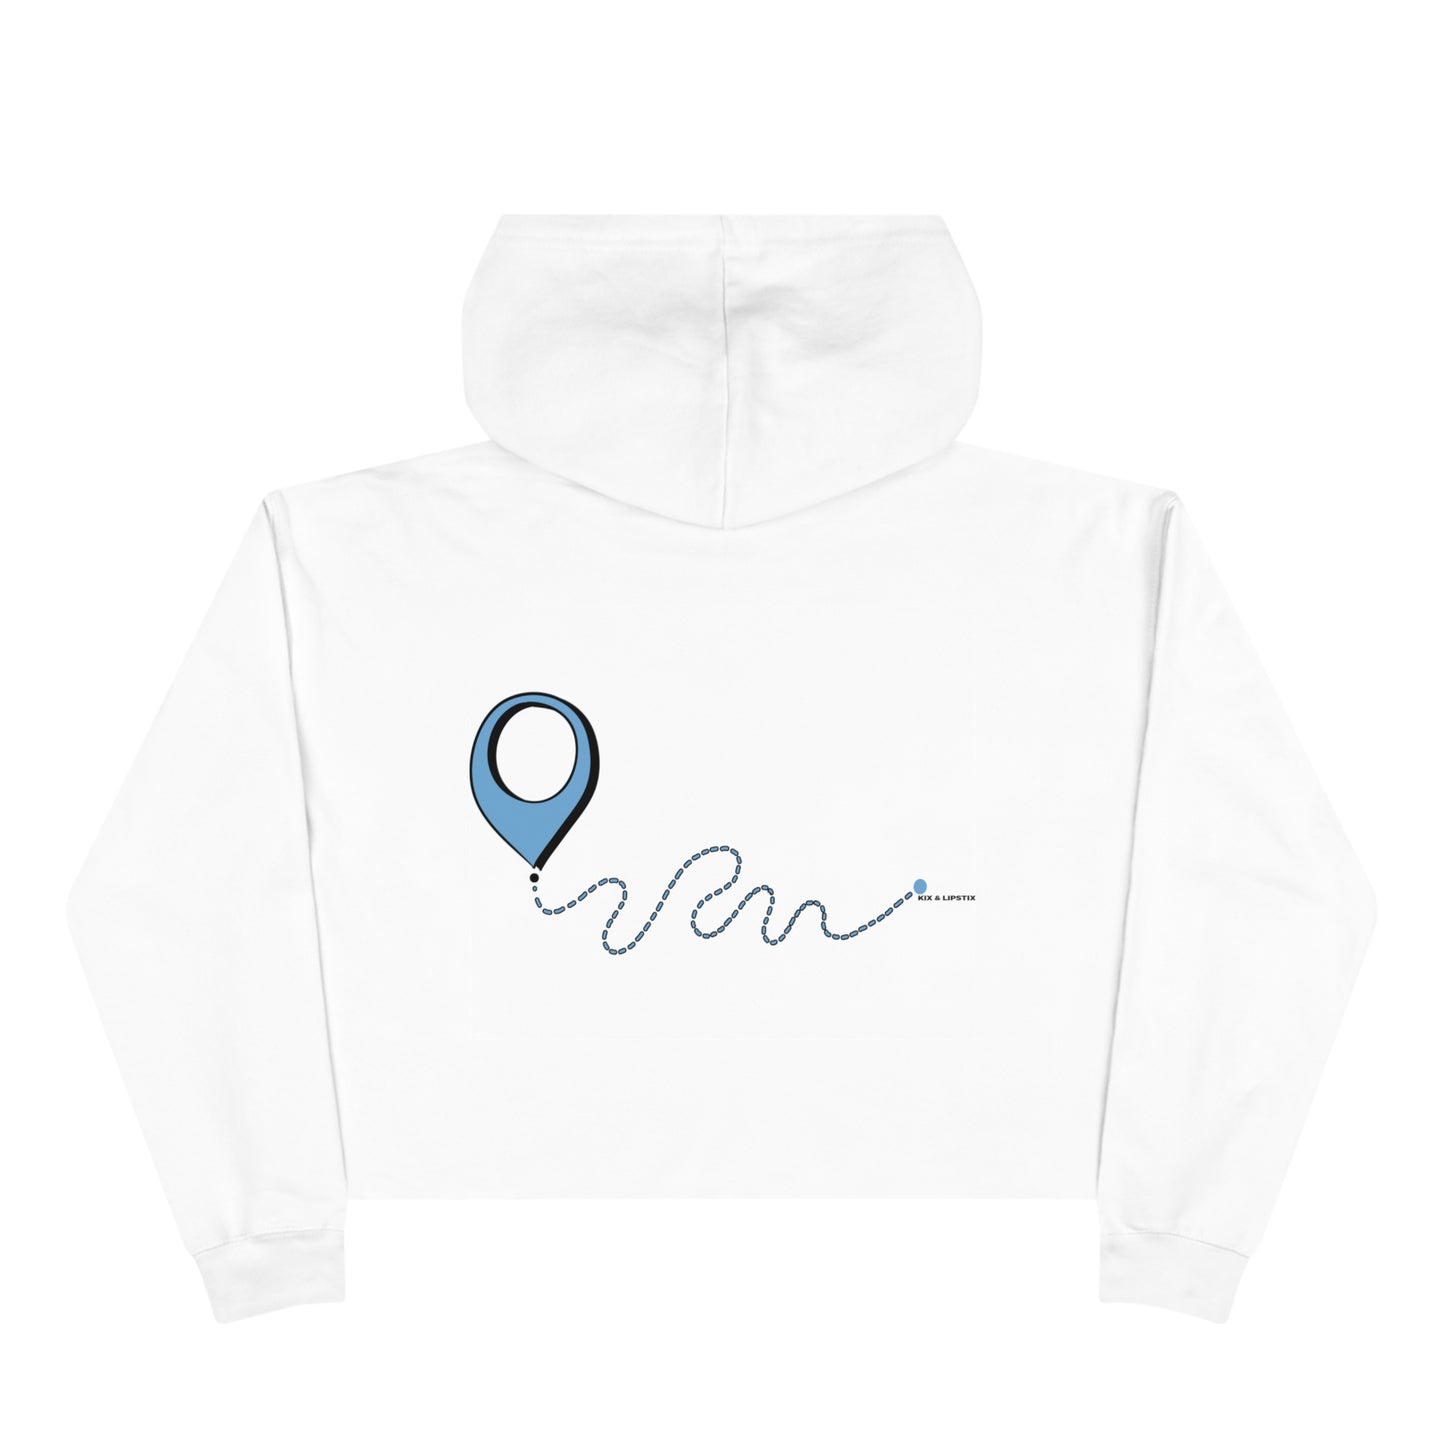 "Great Sneakers Take You Great Places" Crop Hoodie